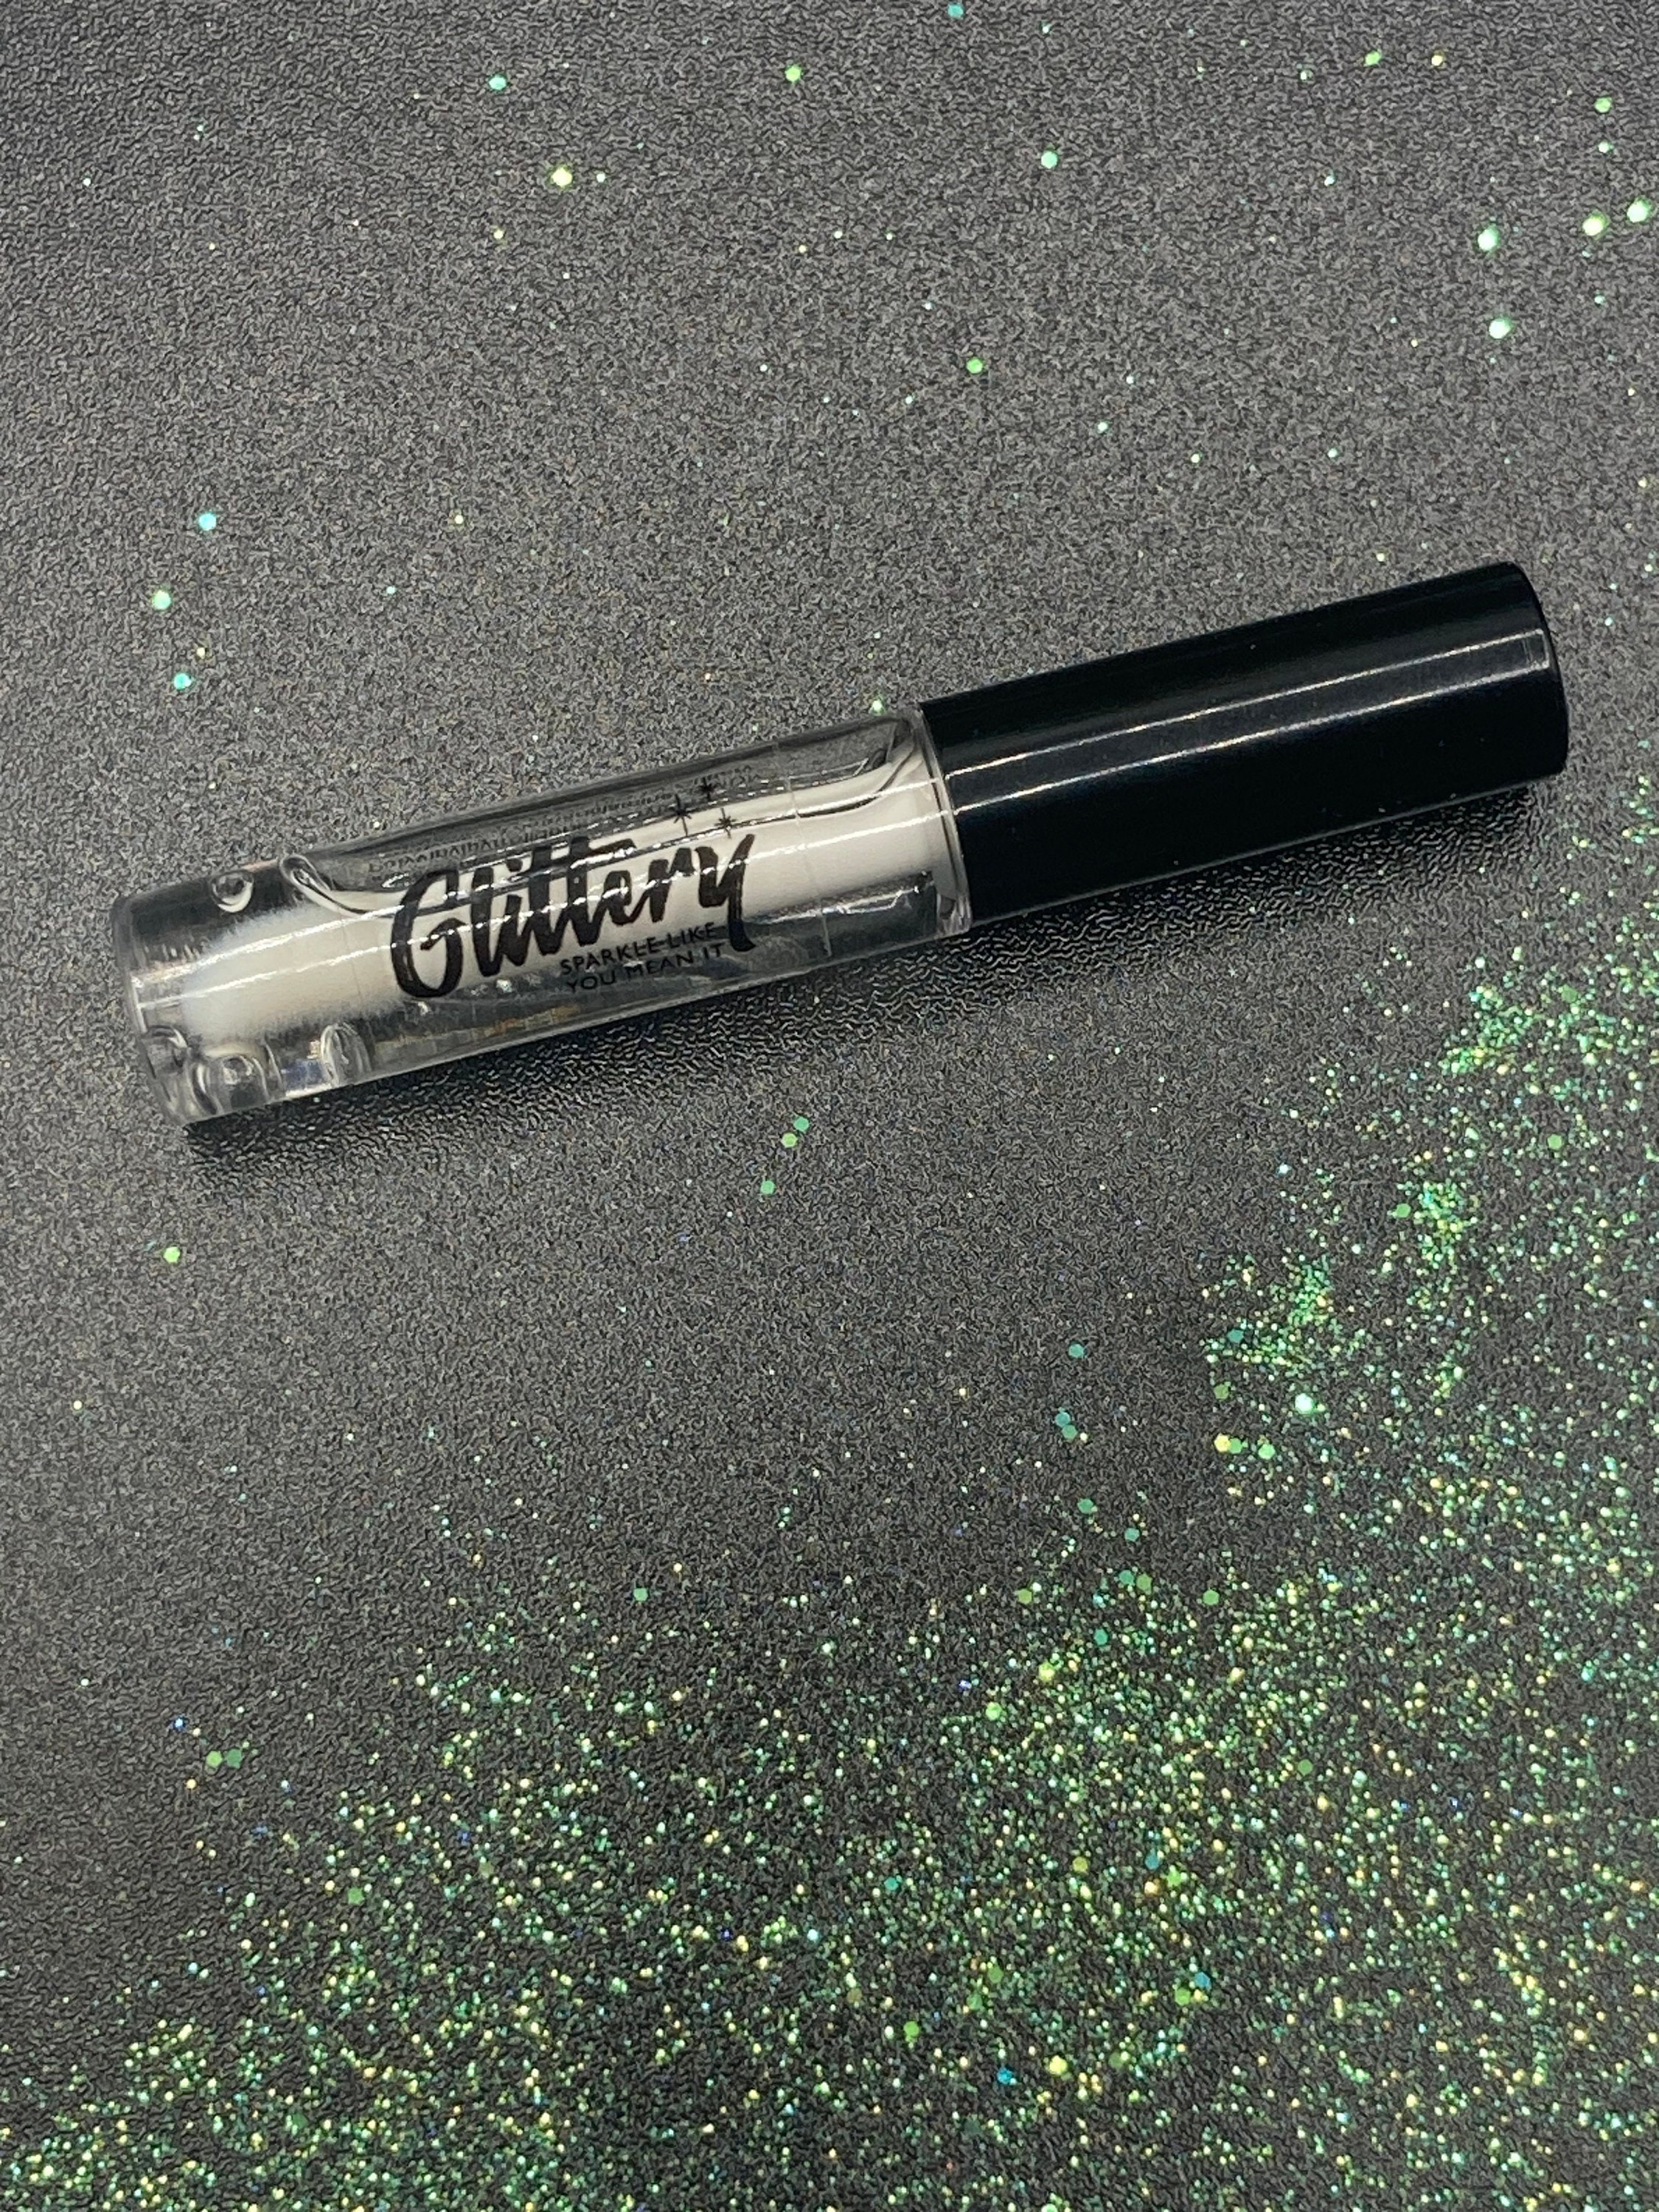 BULK Biodegradable Holographic Silver Glitter .008 Ultrafine  lip glo –  Glittery - Your #1 source for all kinds of glitter products!